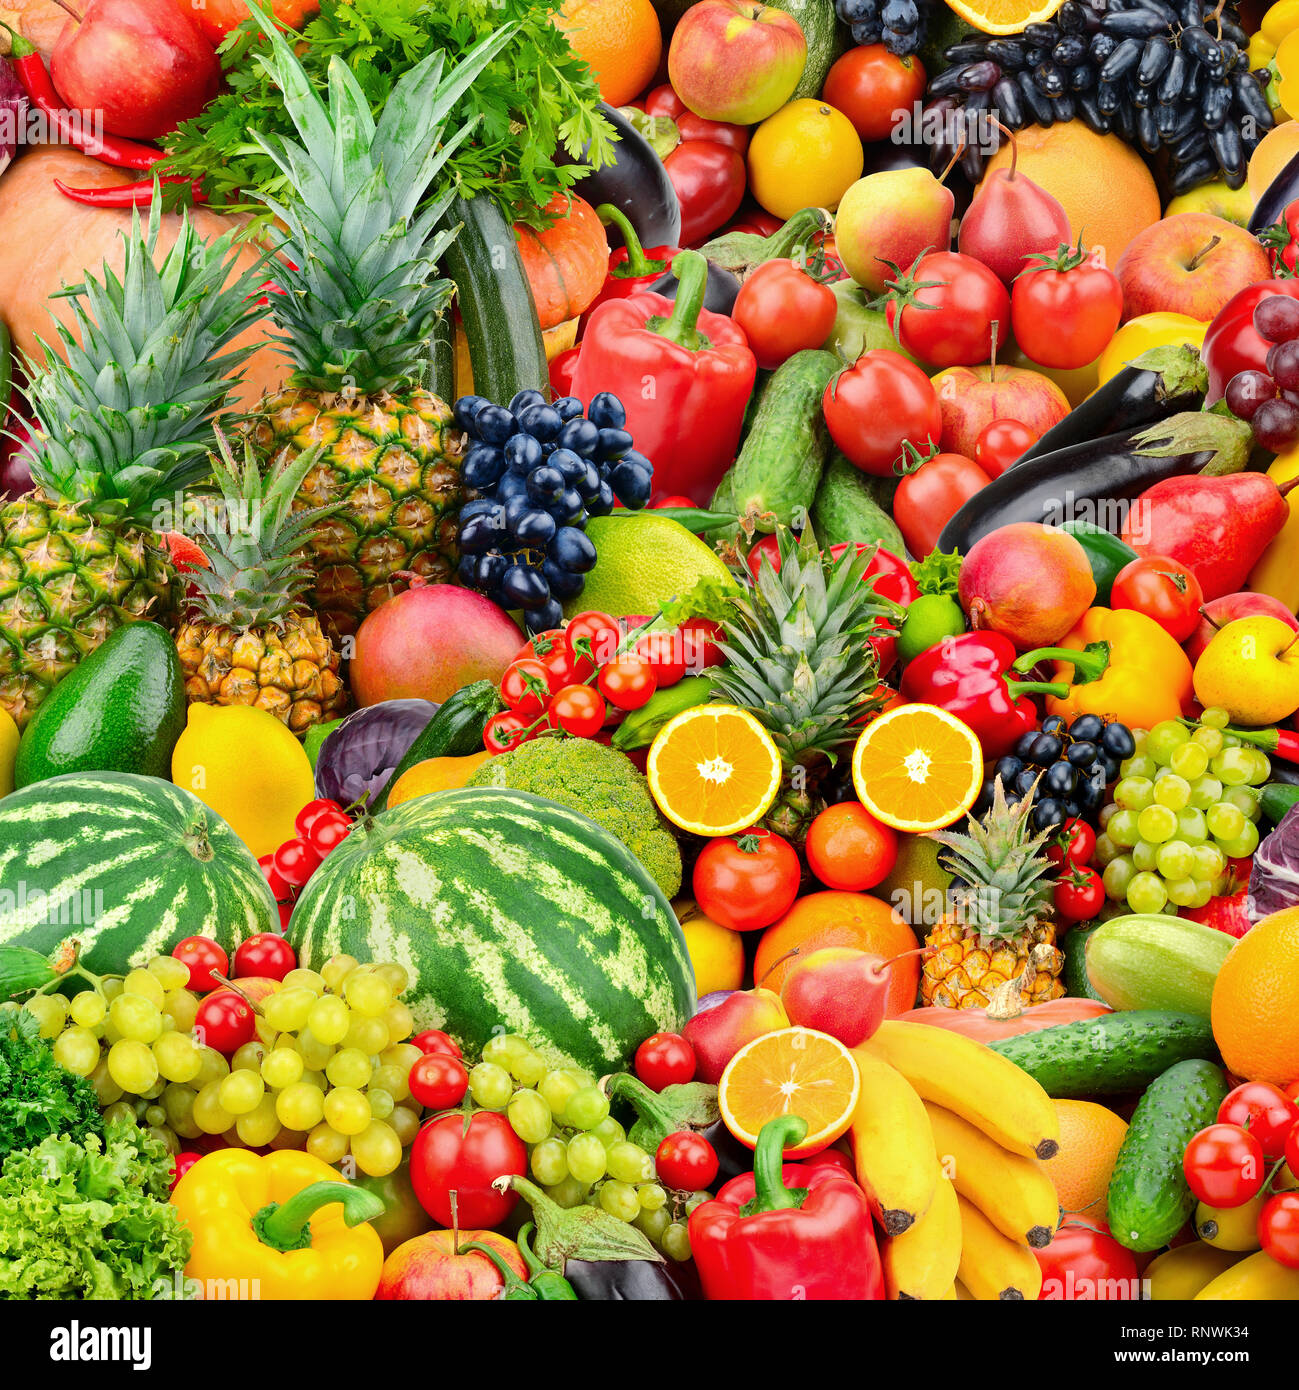 https://c8.alamy.com/comp/RNWK34/assorted-fresh-ripe-fruits-and-vegetables-food-concept-background-top-view-copy-space-RNWK34.jpg